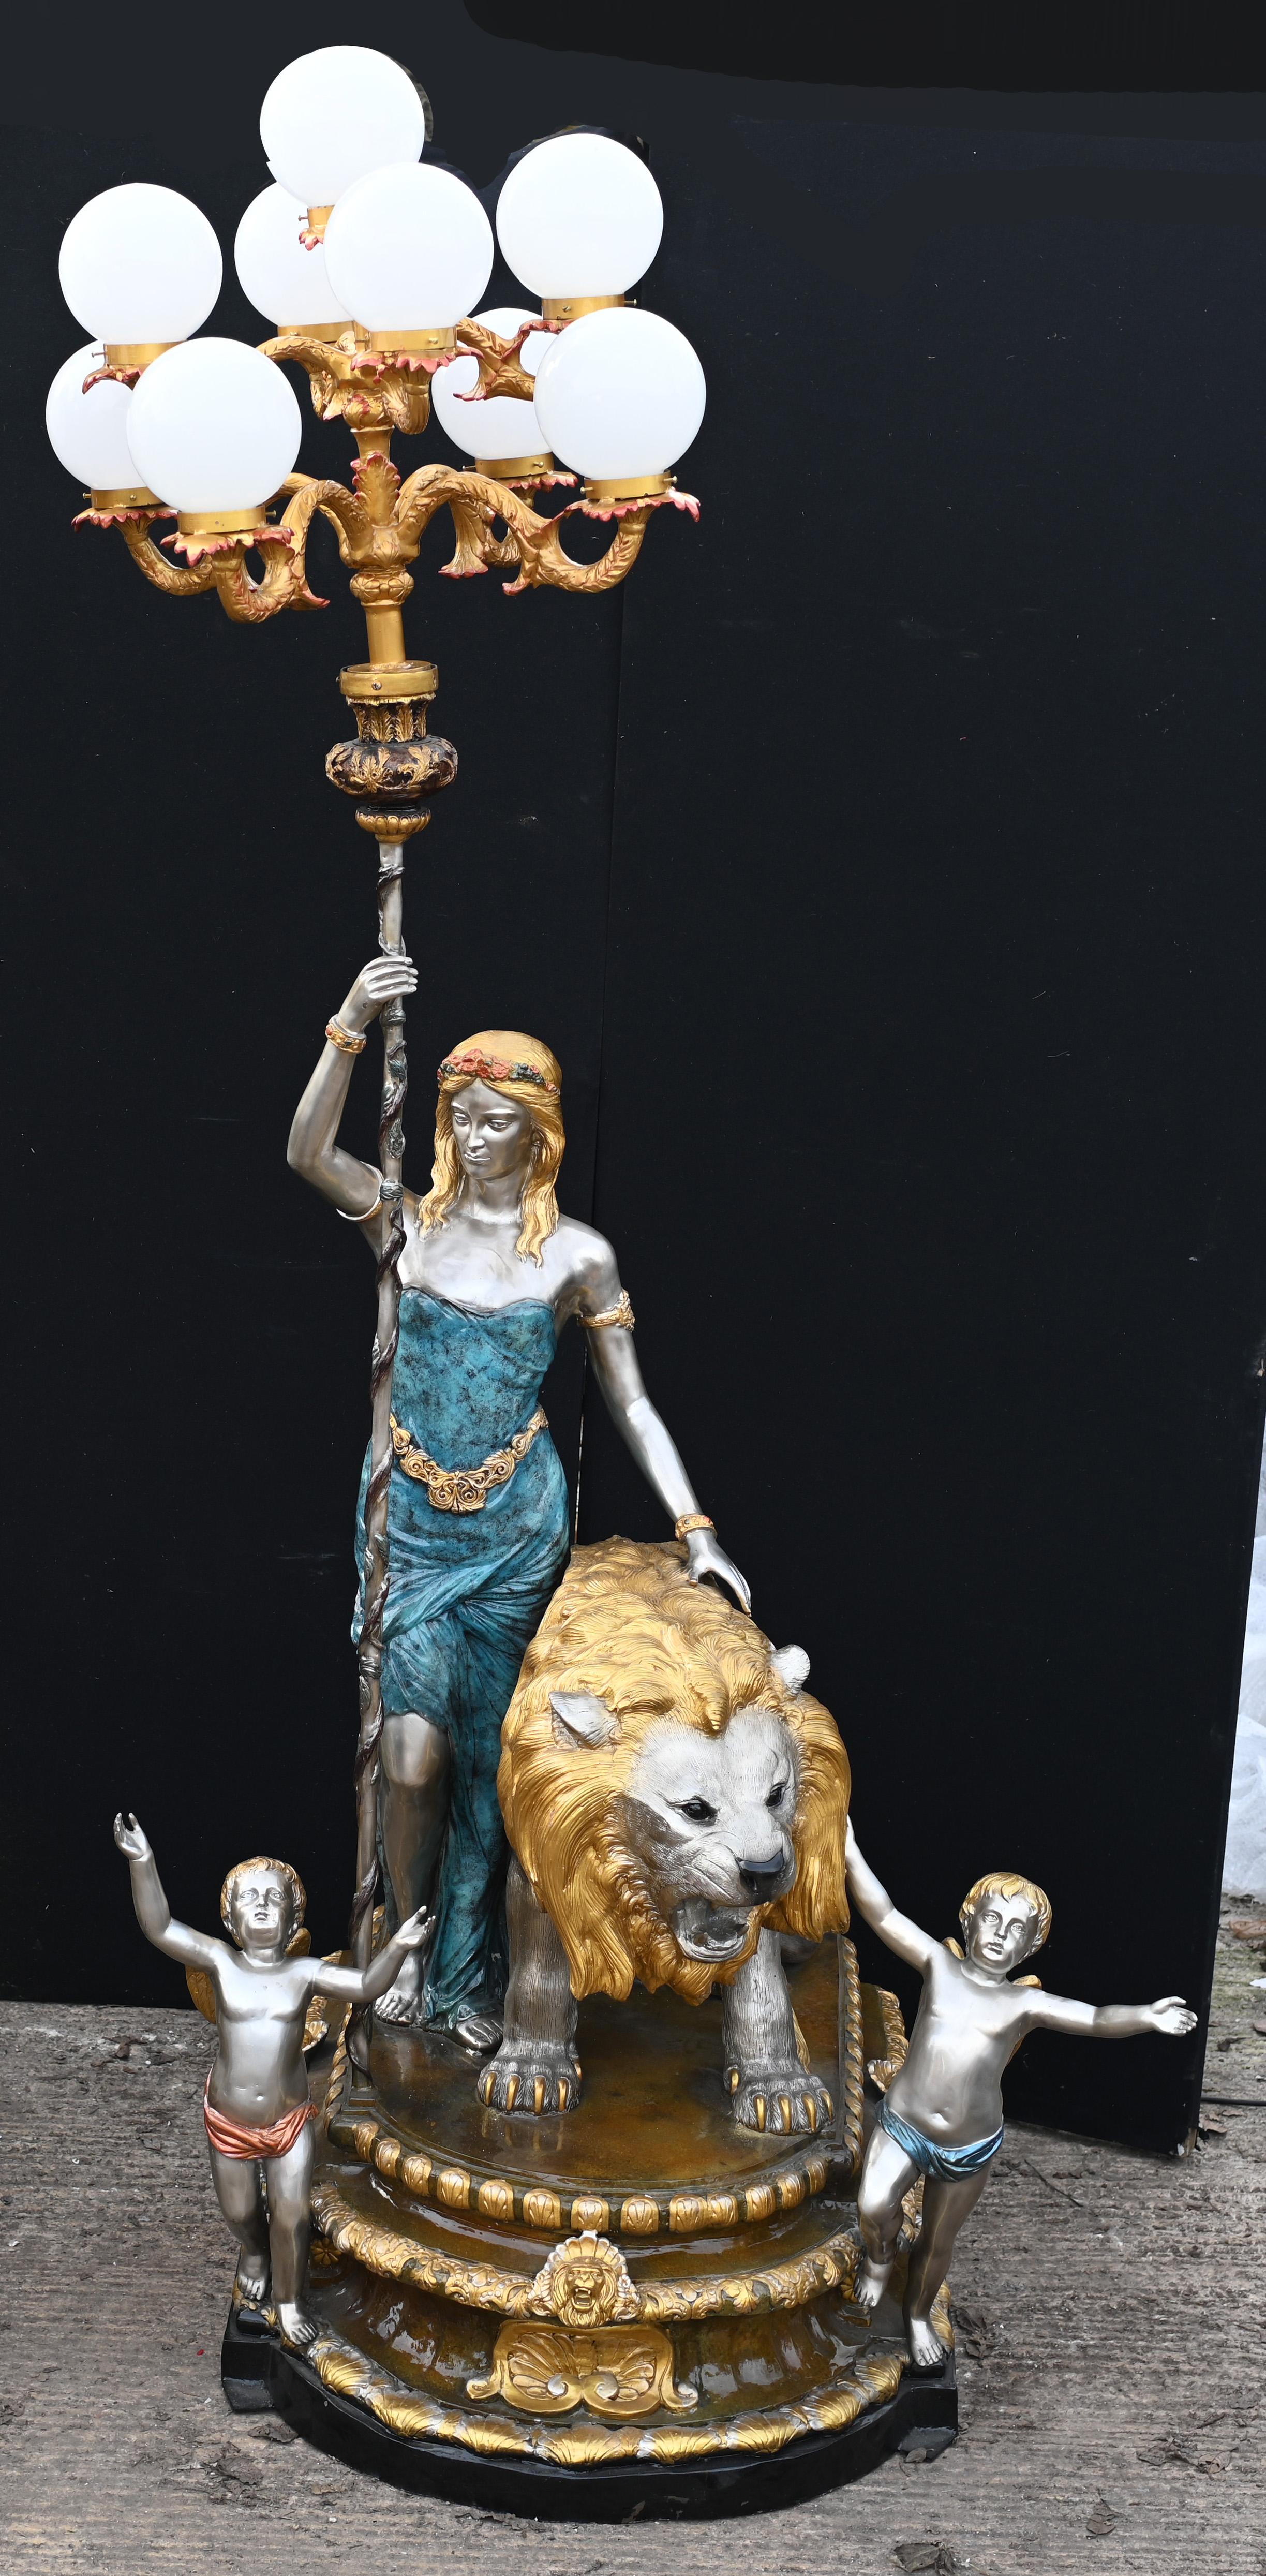 Wow - stunning pair of giant Italian bronze candelabras.
Stand in at ten feet tall - 304 cm over three metres!
Glorious polychrome finish to the statues.
Main candelabras are held aloft by the female maidens.
Flanked by the roaring lions and